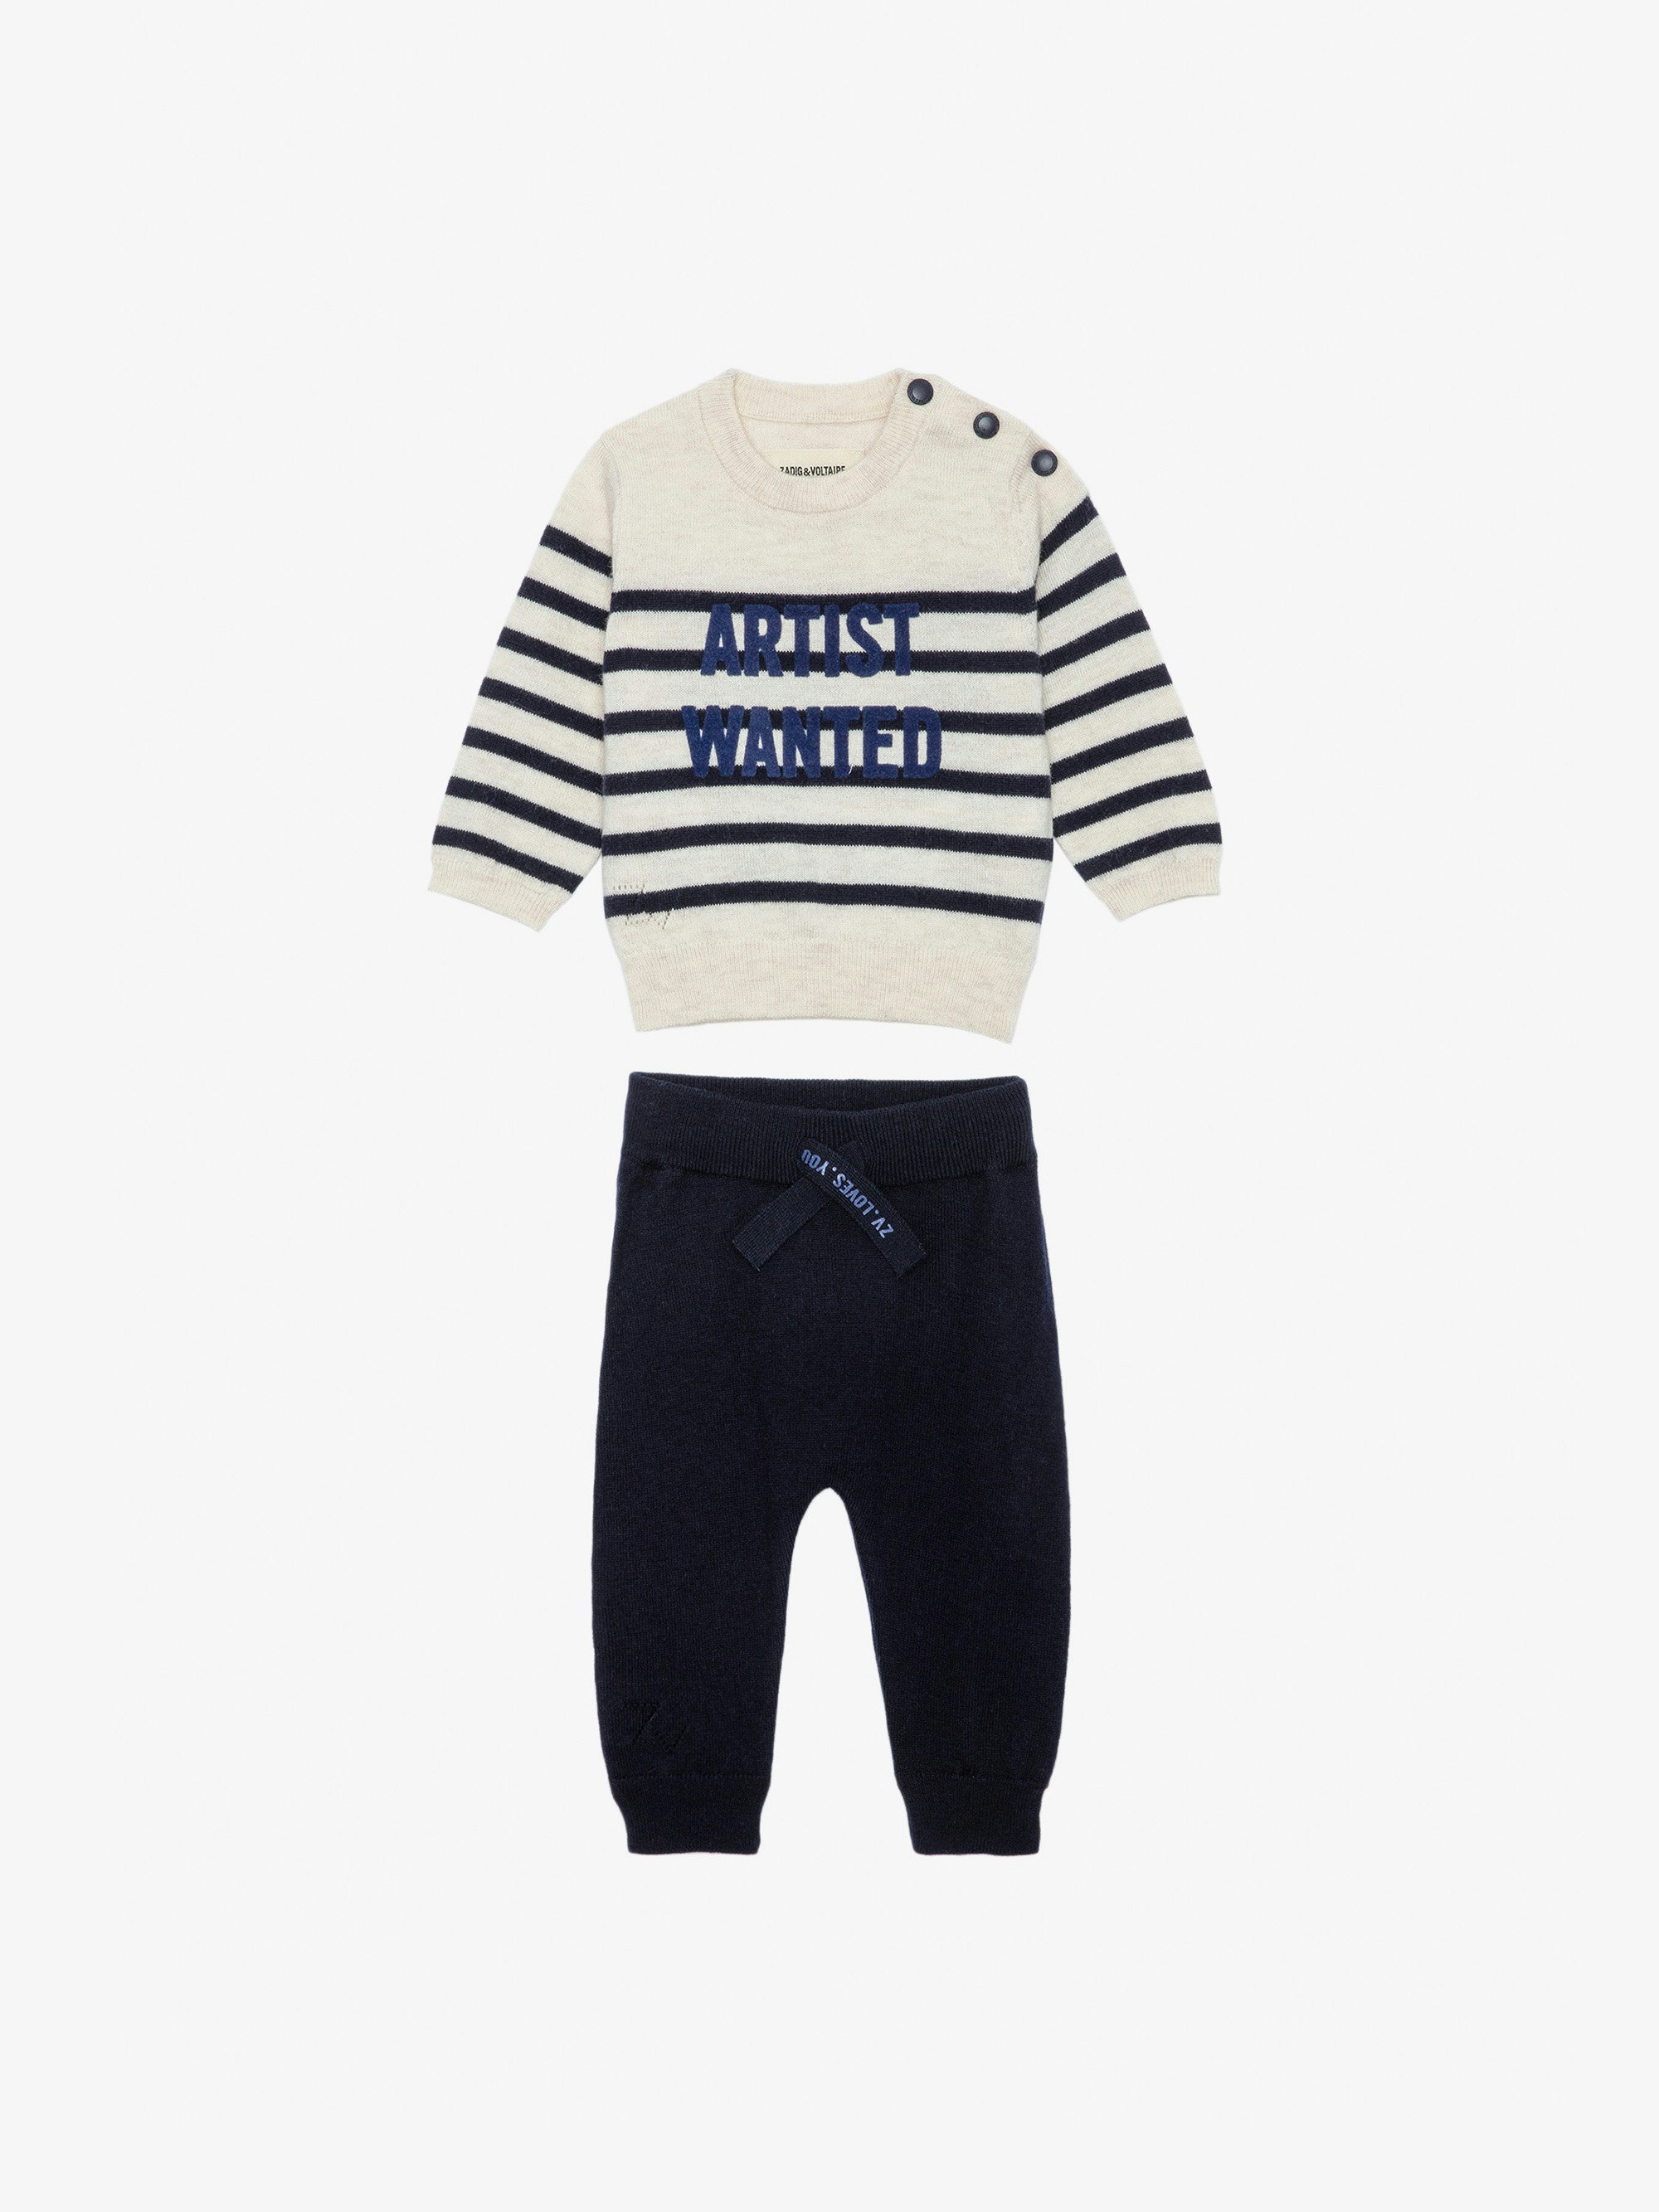 Pona Baby Set - Two-piece baby set with striped jumper featuring the slogan “Artist Wanted” and blue knit trousers.